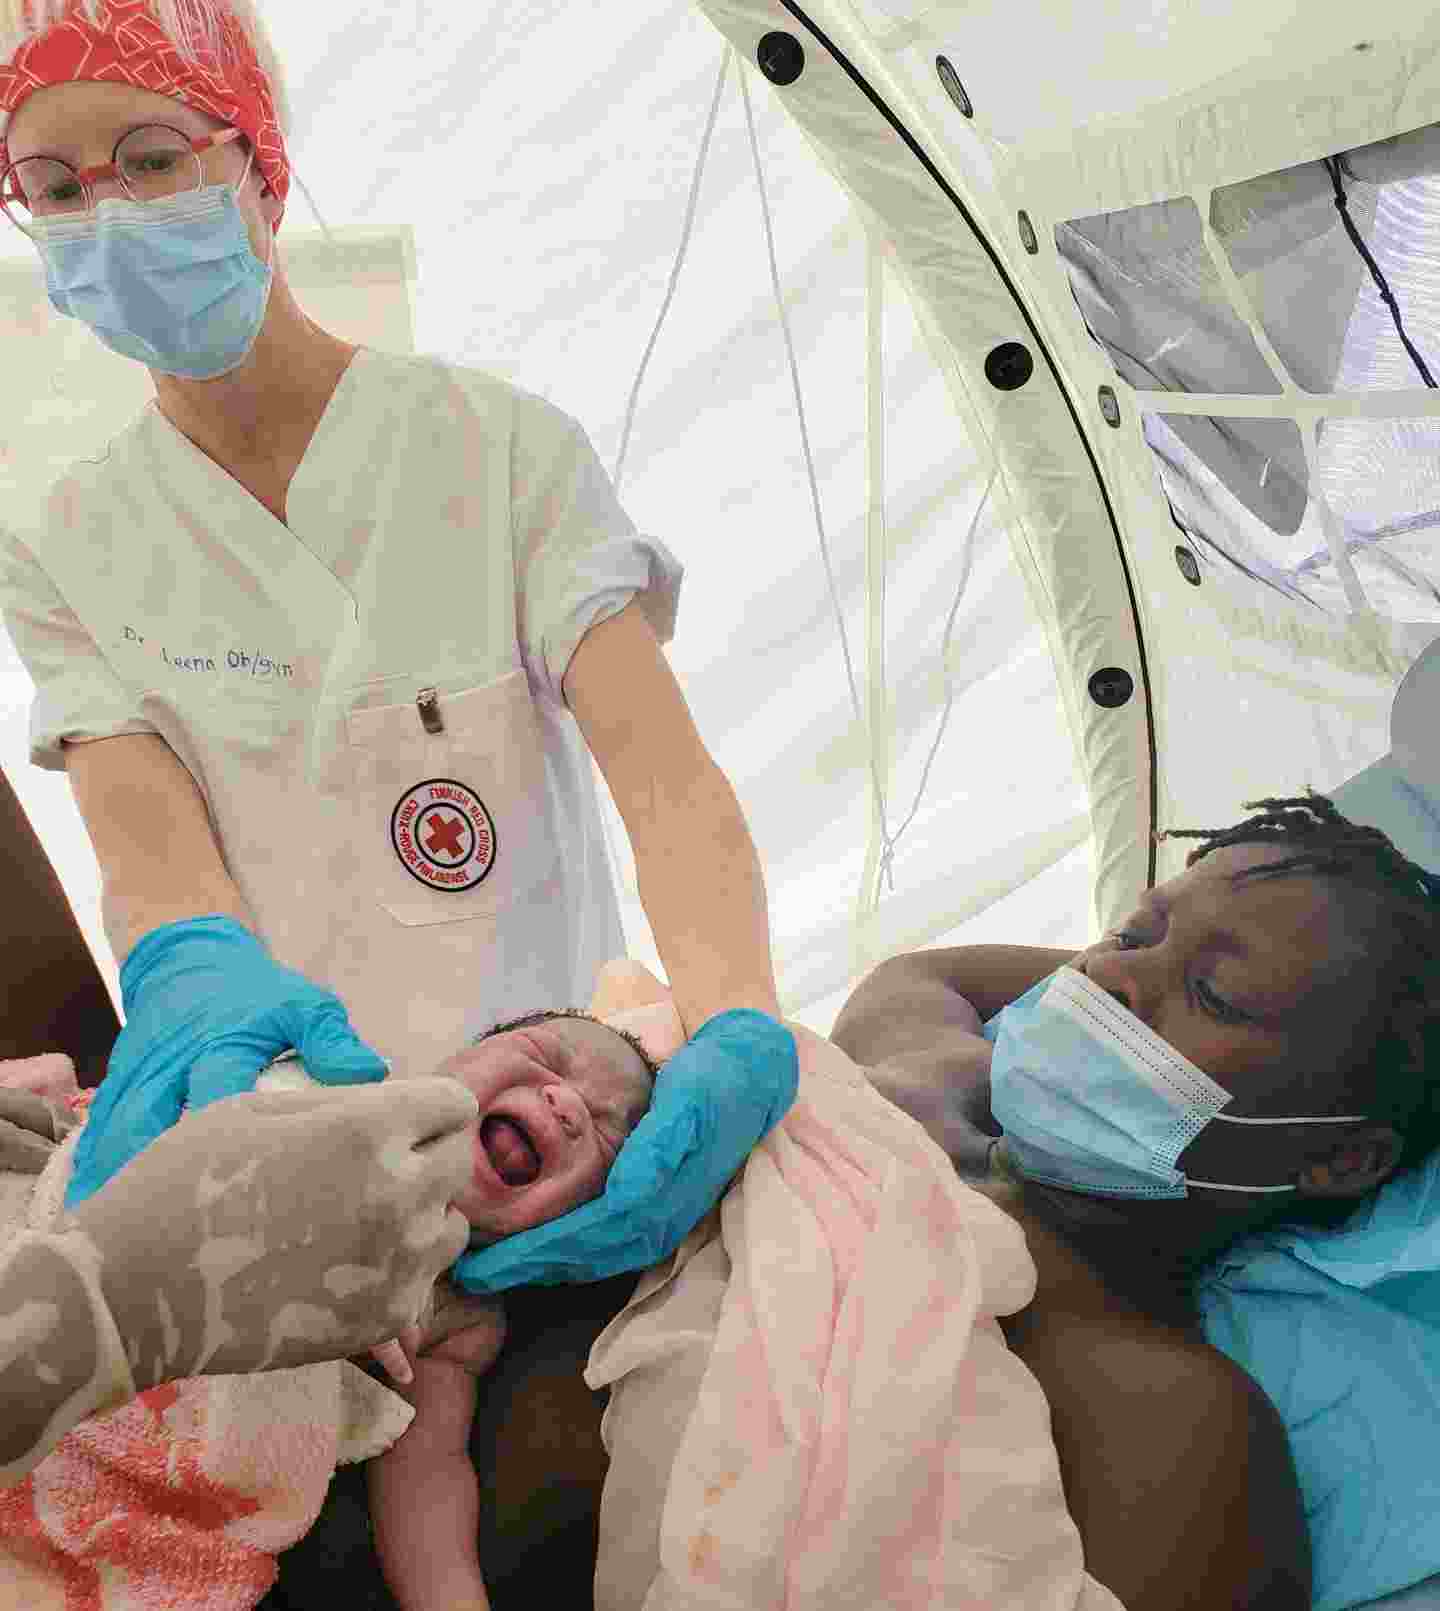 A doctor wearing Red Cross clothing examines a newborn baby held by its mother.